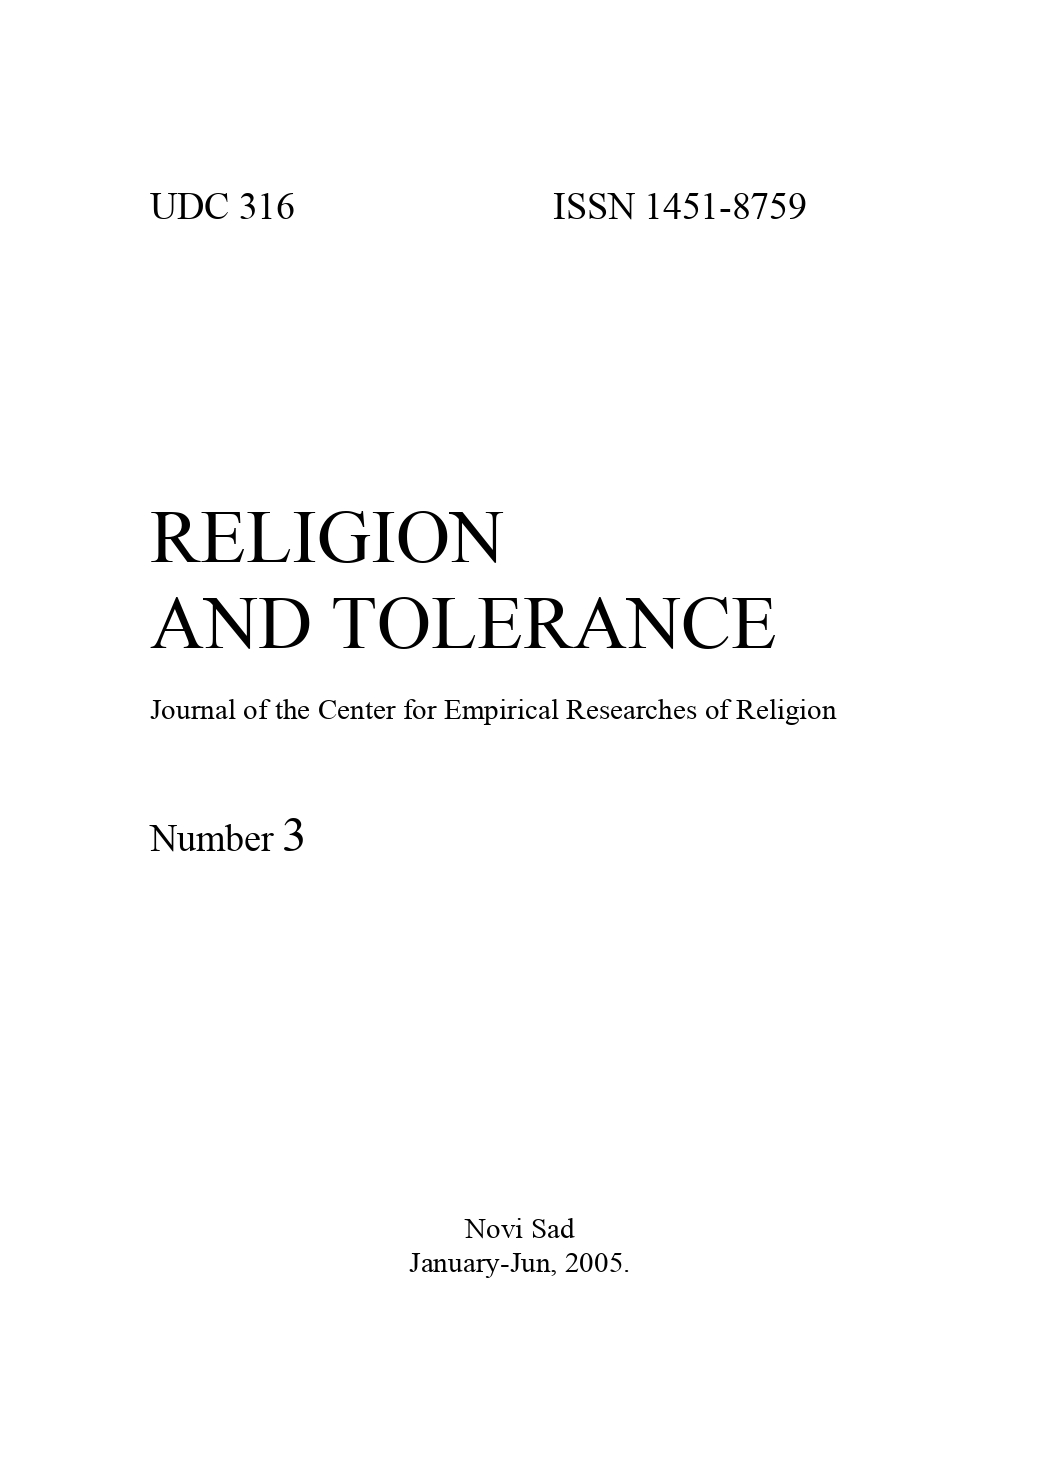 RELIGION AND TOLERANCE Cover Image